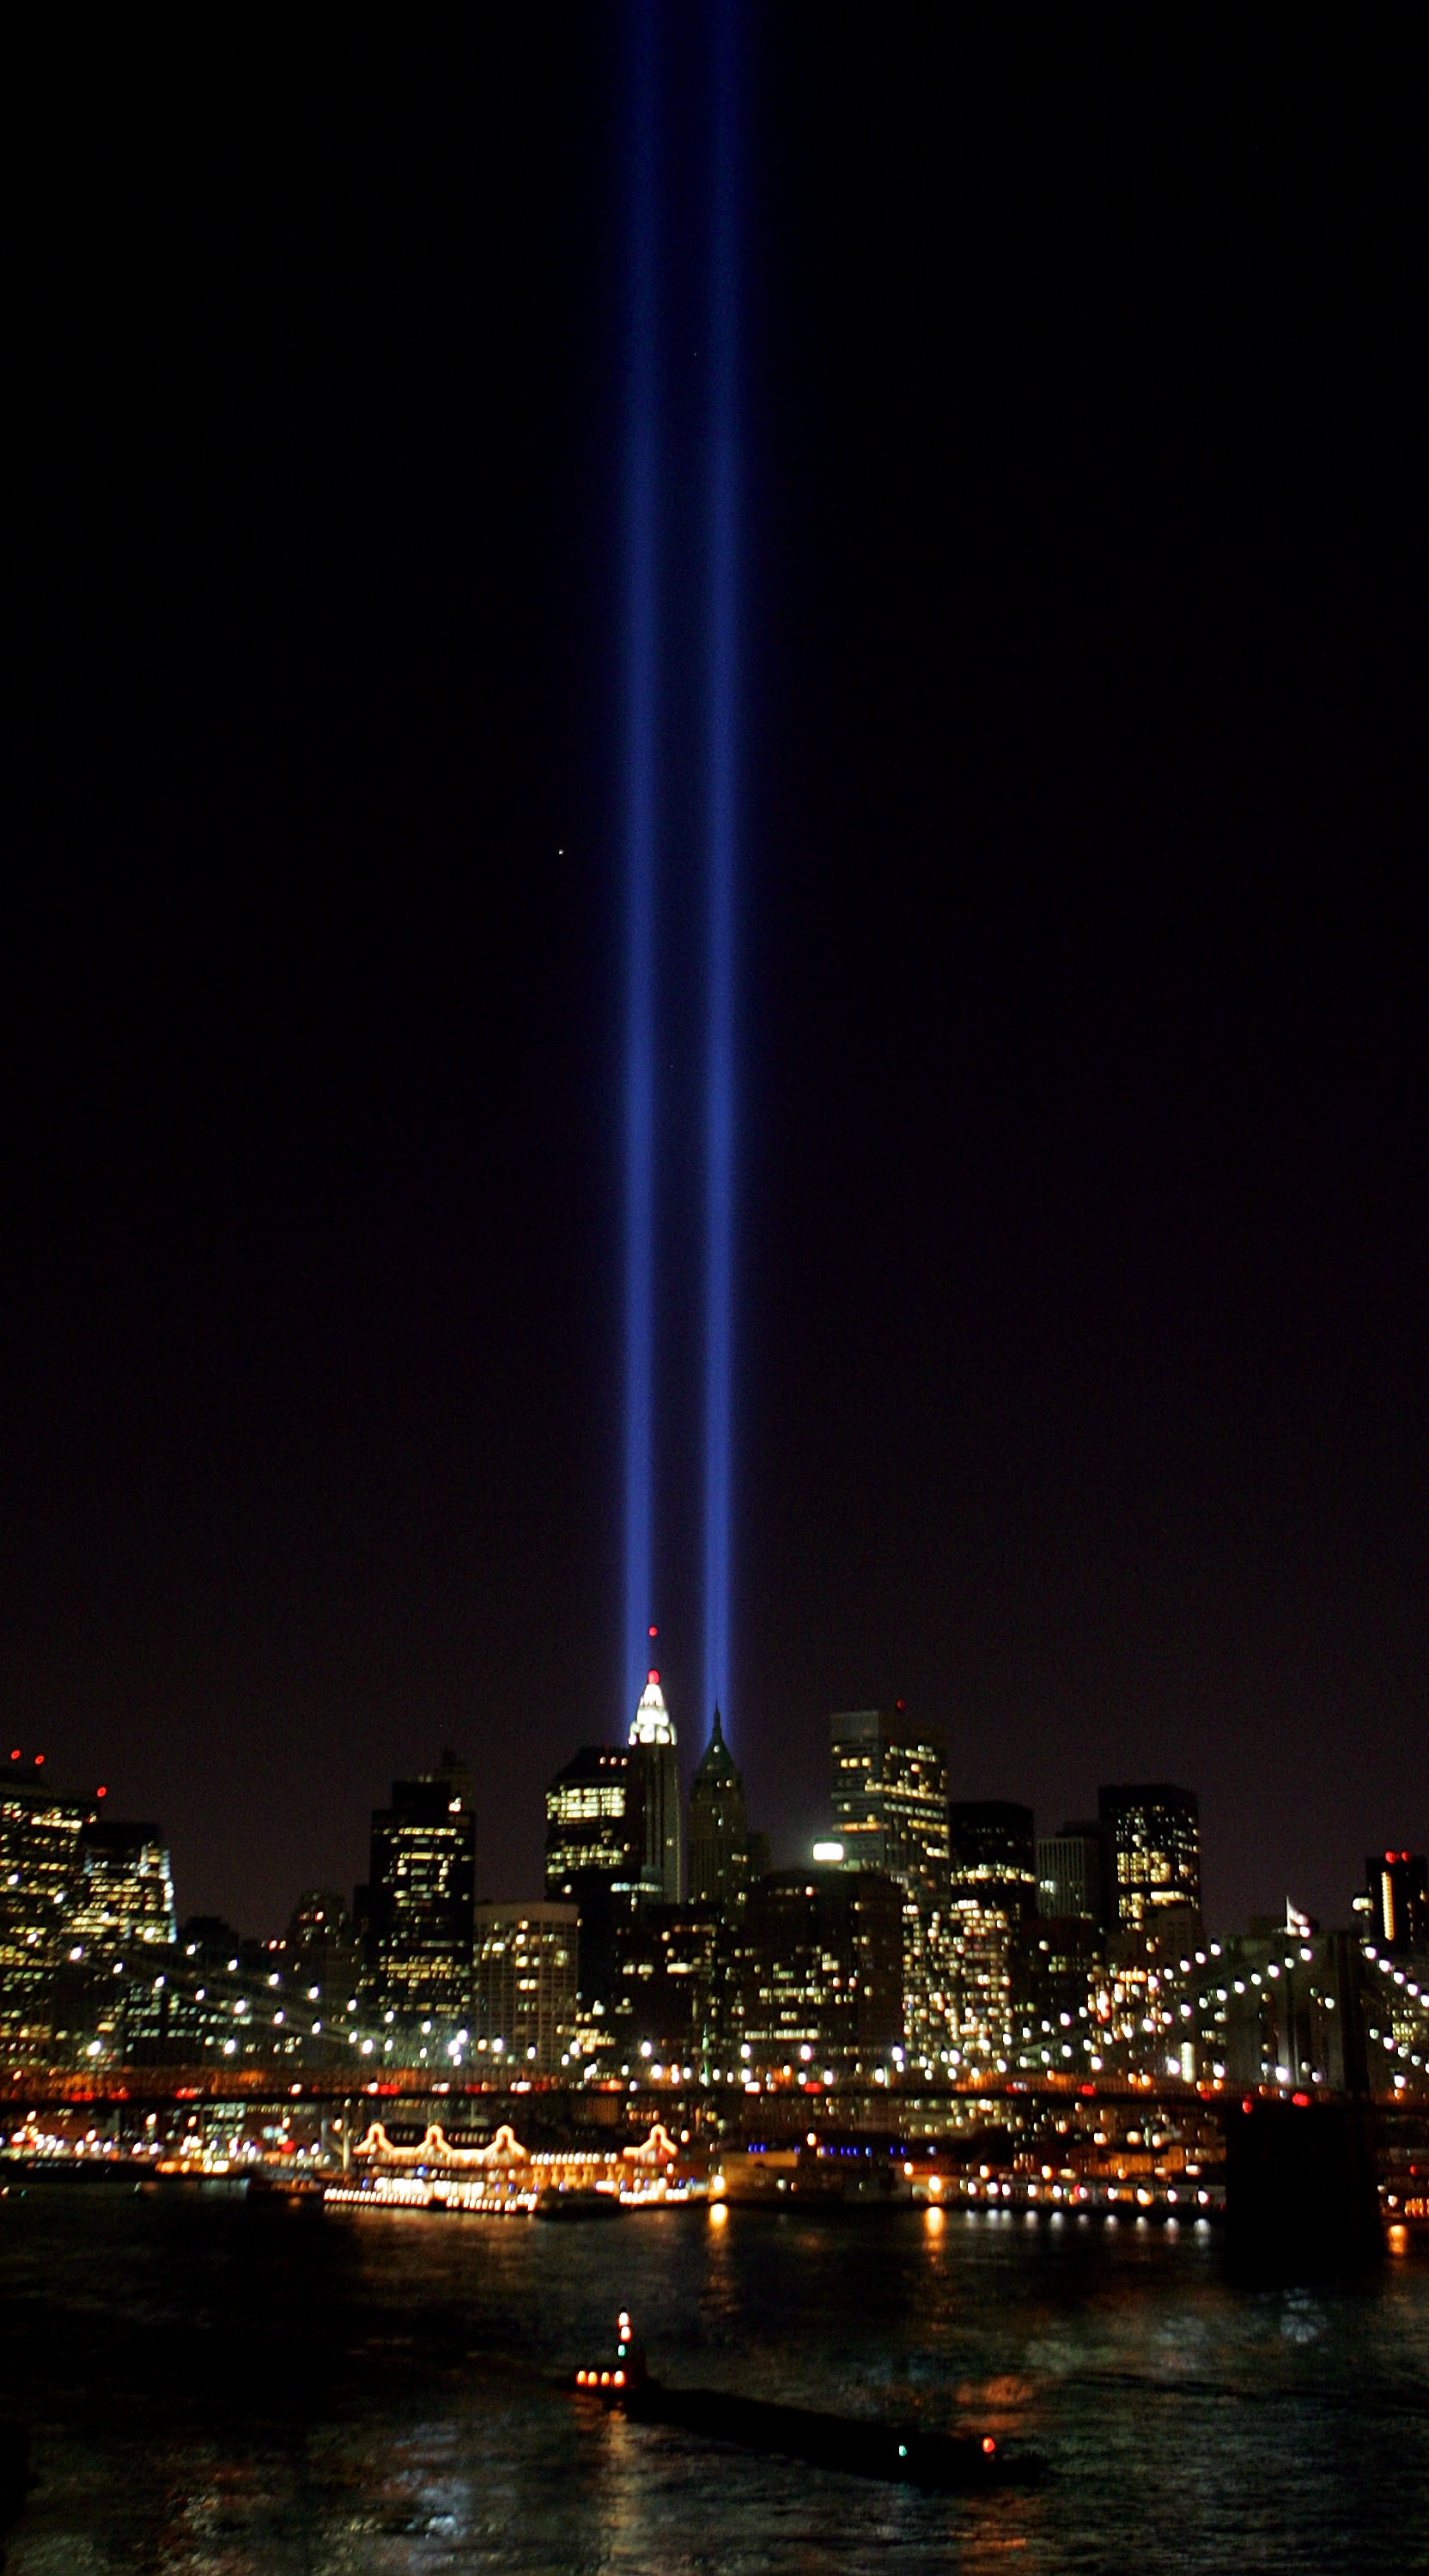 NEW YORK - SEPTEMBER 11: Beams of light shine into the sky behind the Brooklyn Bridge and above the Manhattan skyline on September 11, 2005 in New York City. The lights pay tribute to those who lost their lives when the World Trade Center was attacked four years ago. (Photo by Daniel Berehulak/Getty Images)